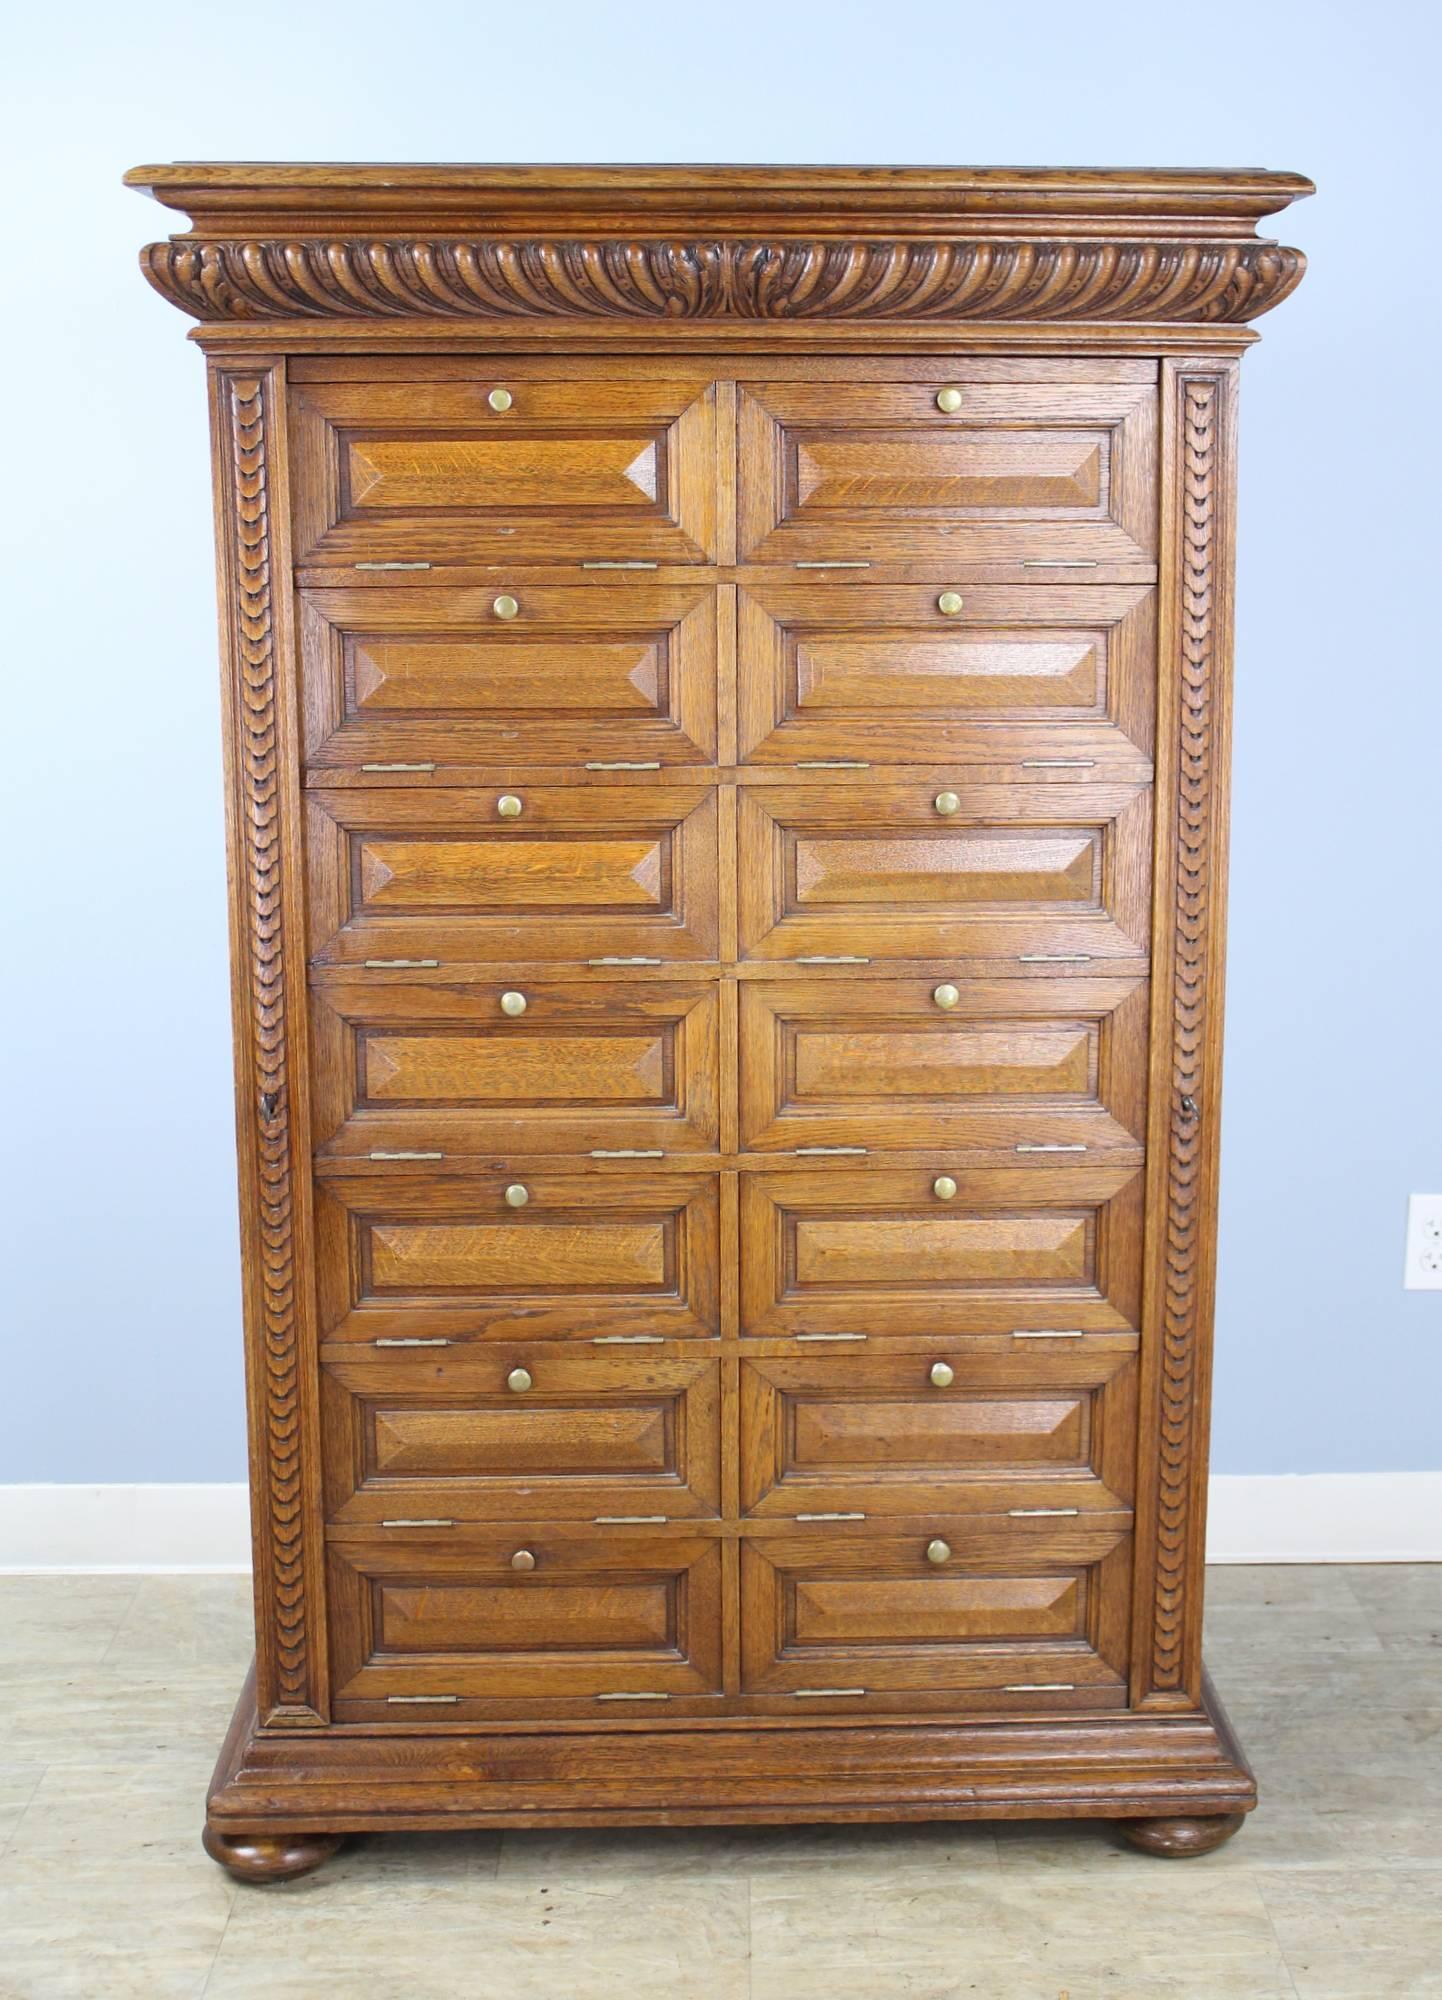 An ornately carved French oak cabinet in the Wellington style, with closures on each side to lock and secure the 14 compartments shut. The cornice has a spectacular pattern which is echoed on the side closures. The oak on this piece is in very good